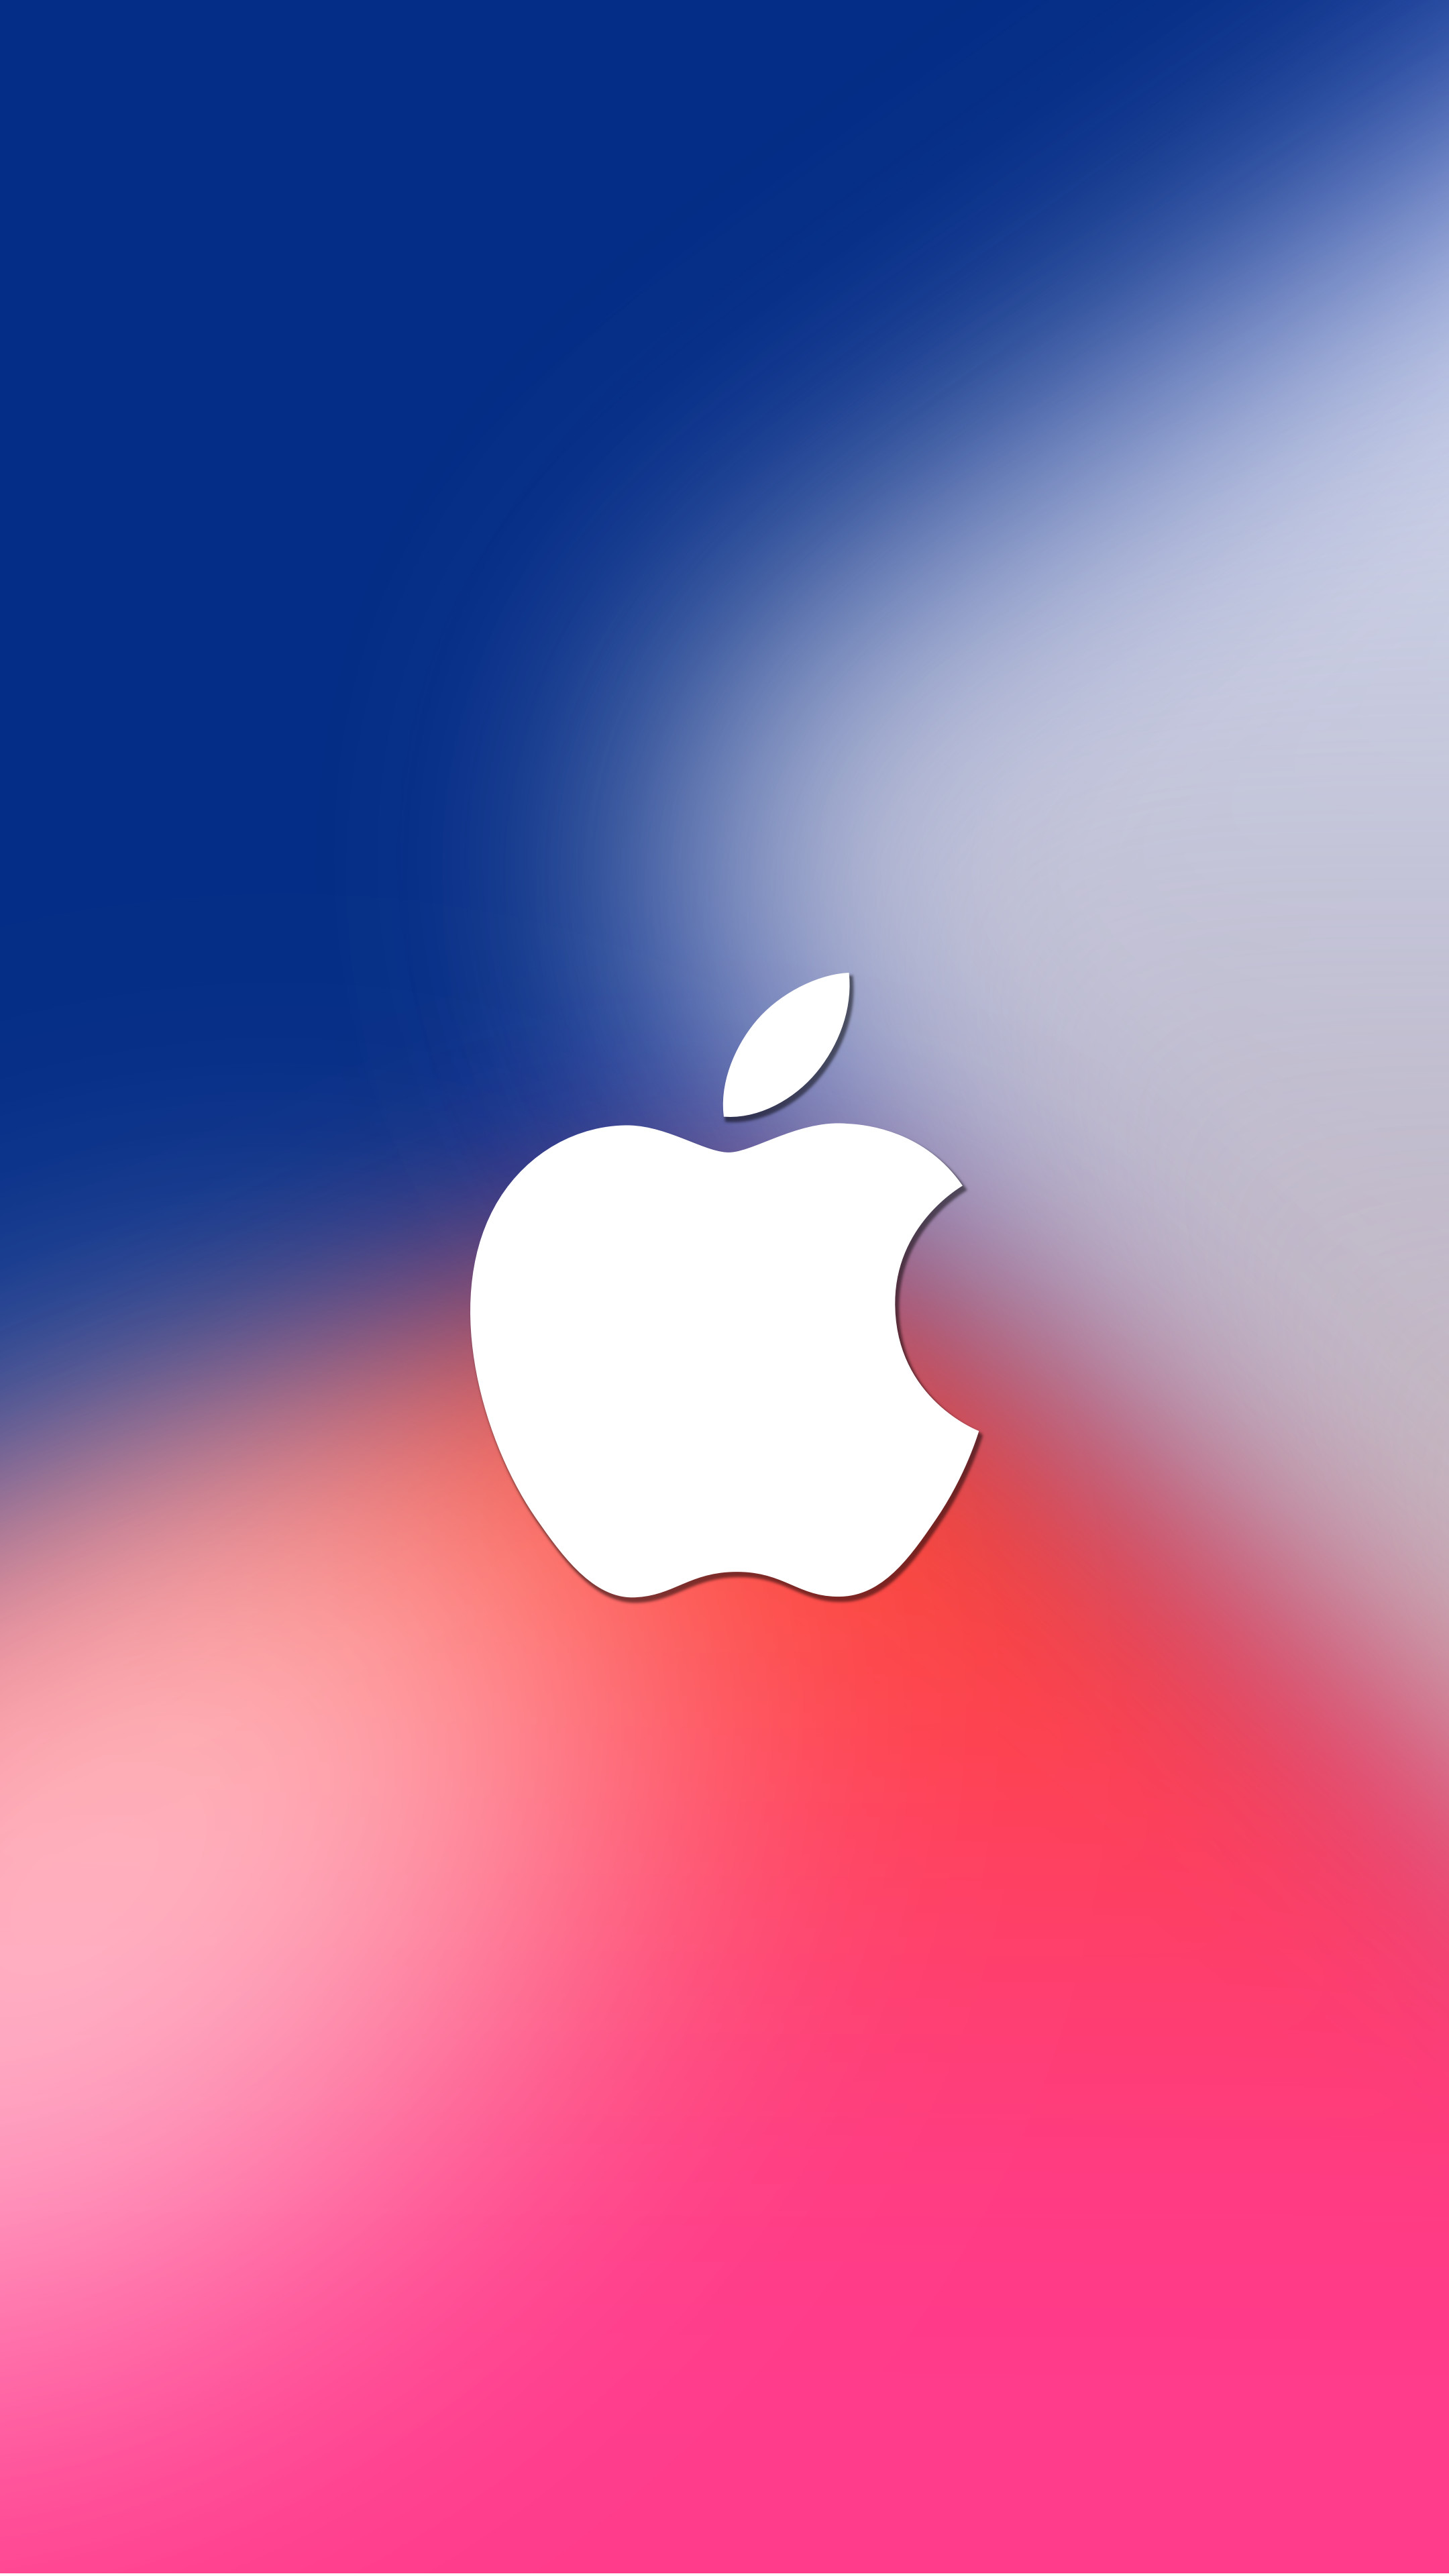 2160x3840 Title: iPhone 8 keynote wallpaper. Description: Full screen color  combination with white Apple logo centered in the middle of the theme.